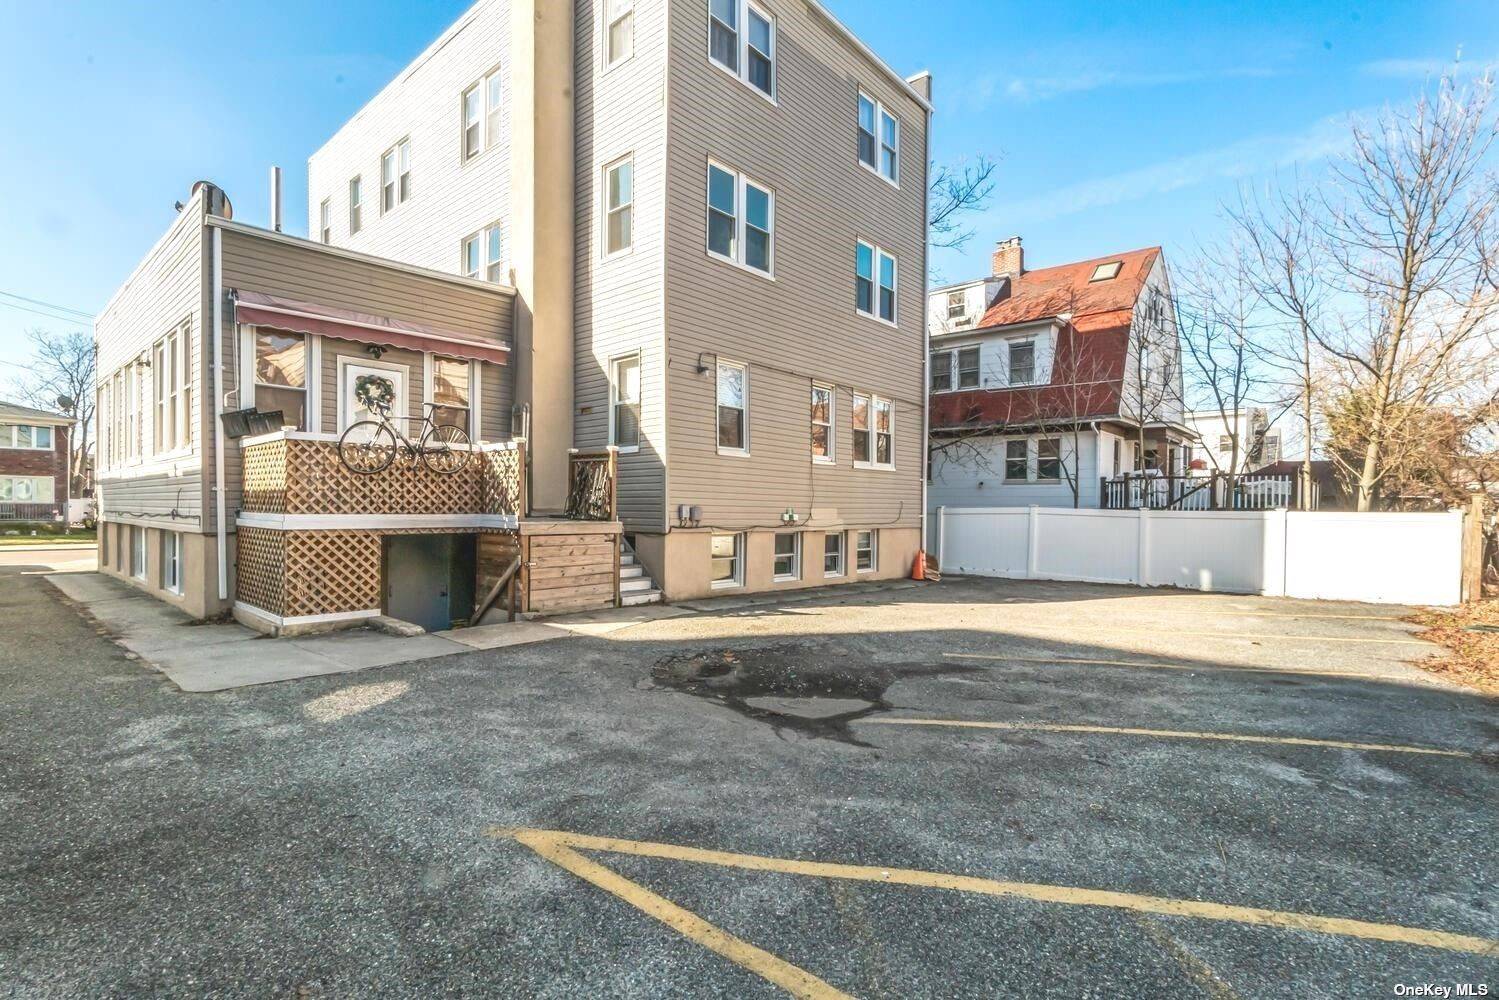 This spacious one bedroom coop in Rockaway Park is the perfect opportunity for those looking for a tranquil beachside living experience.